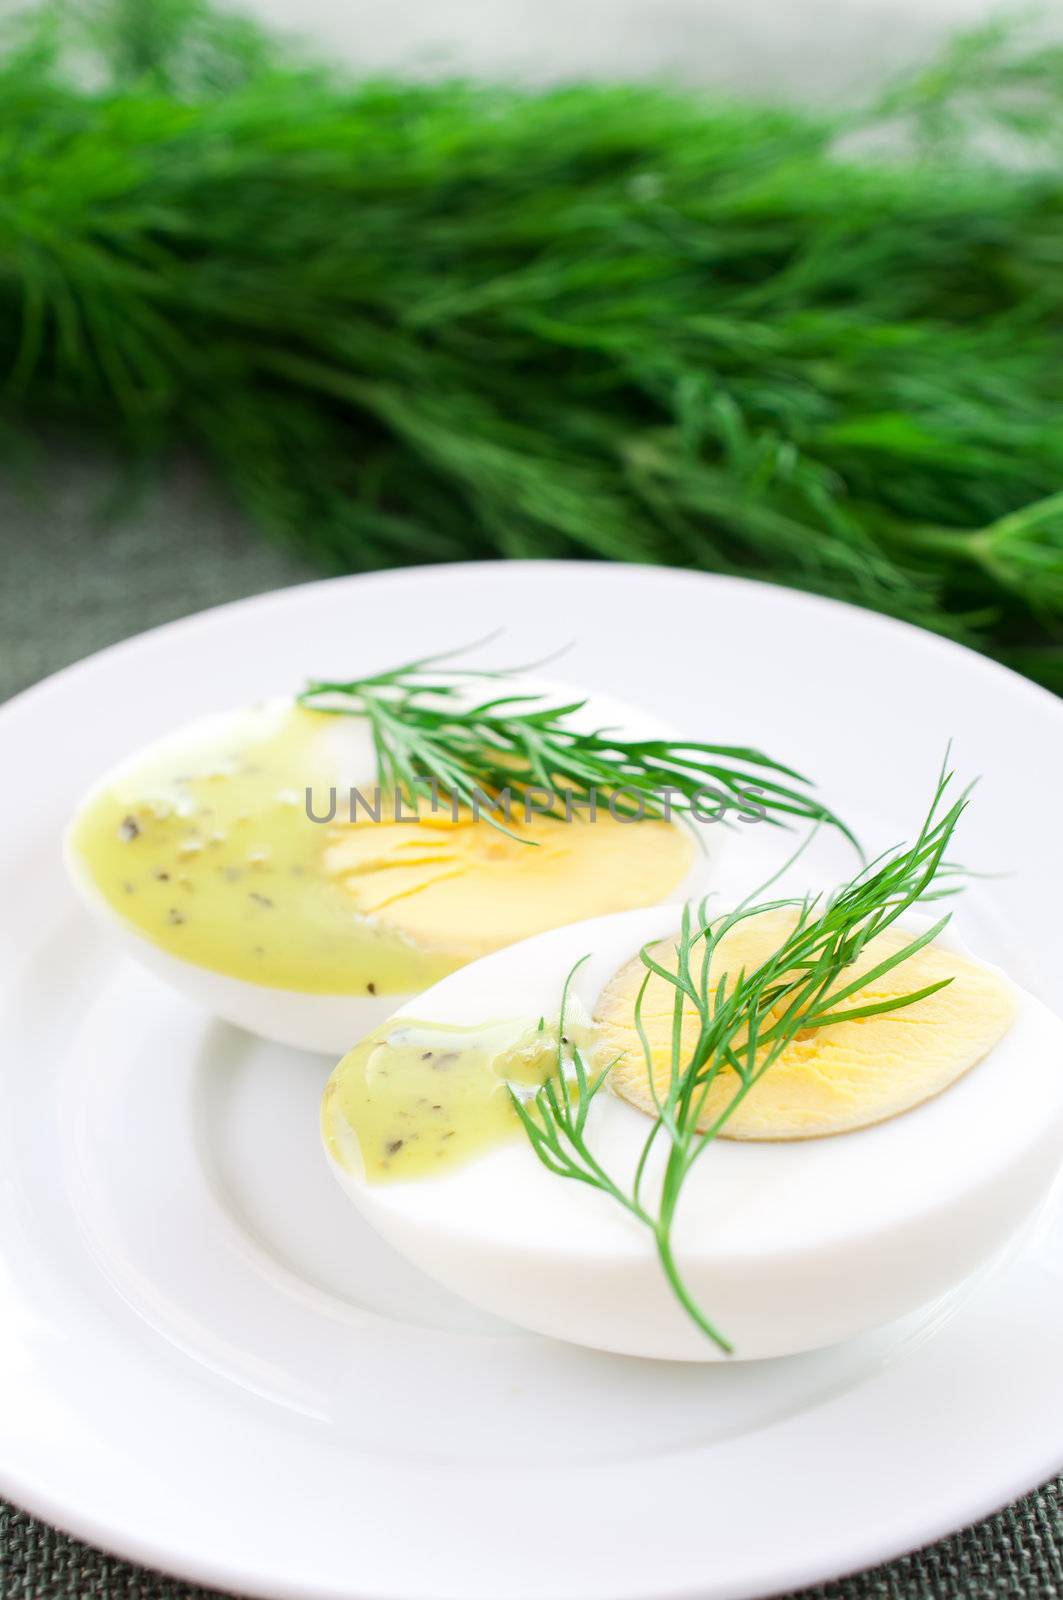 Egg cut in half on dill background by Nanisimova